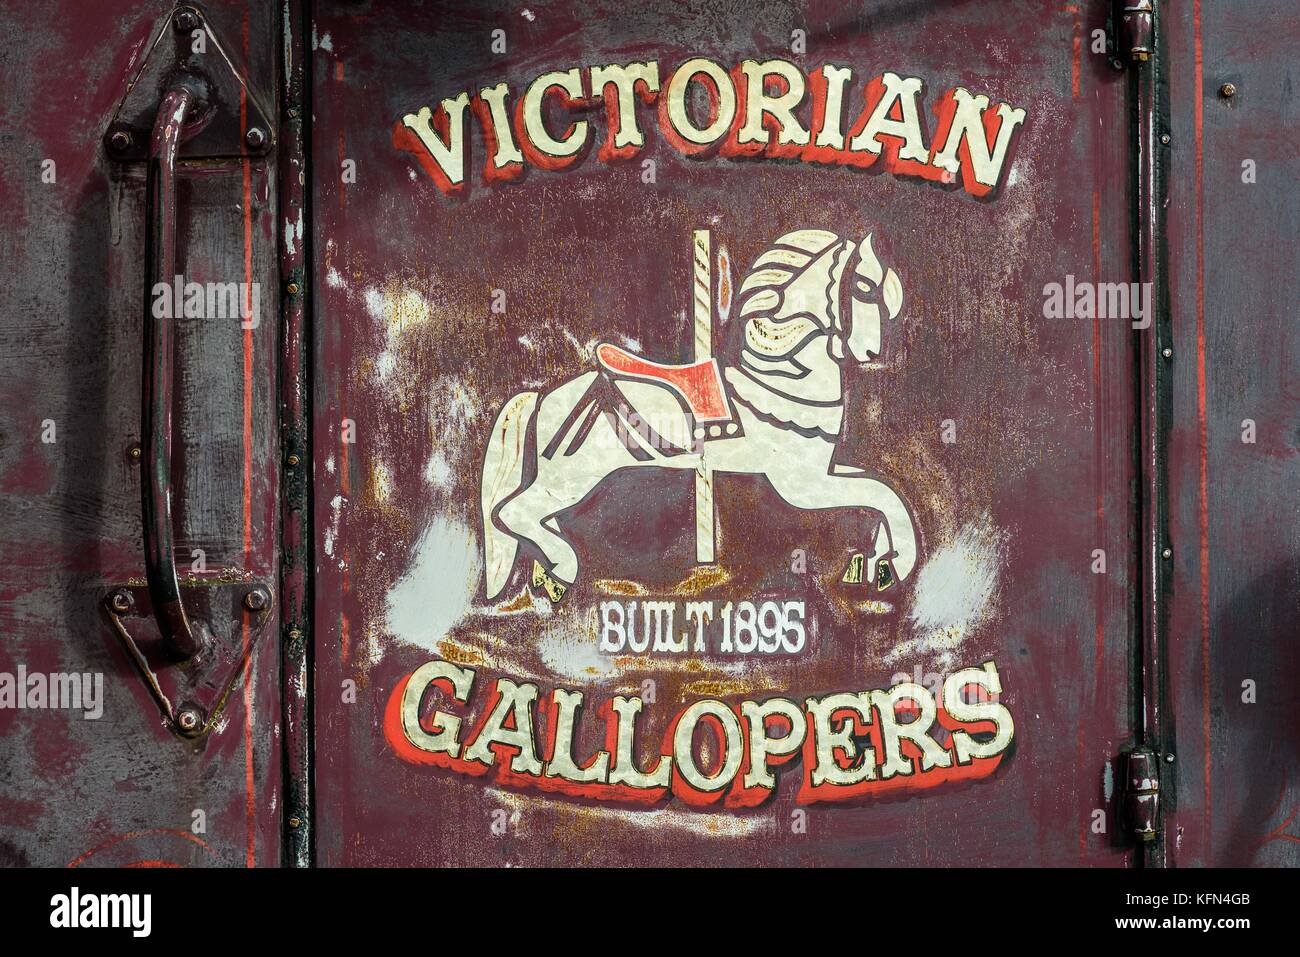 Illustration of a traditional fairground roundabout horse on an old vintage vehicle. Stock Photo